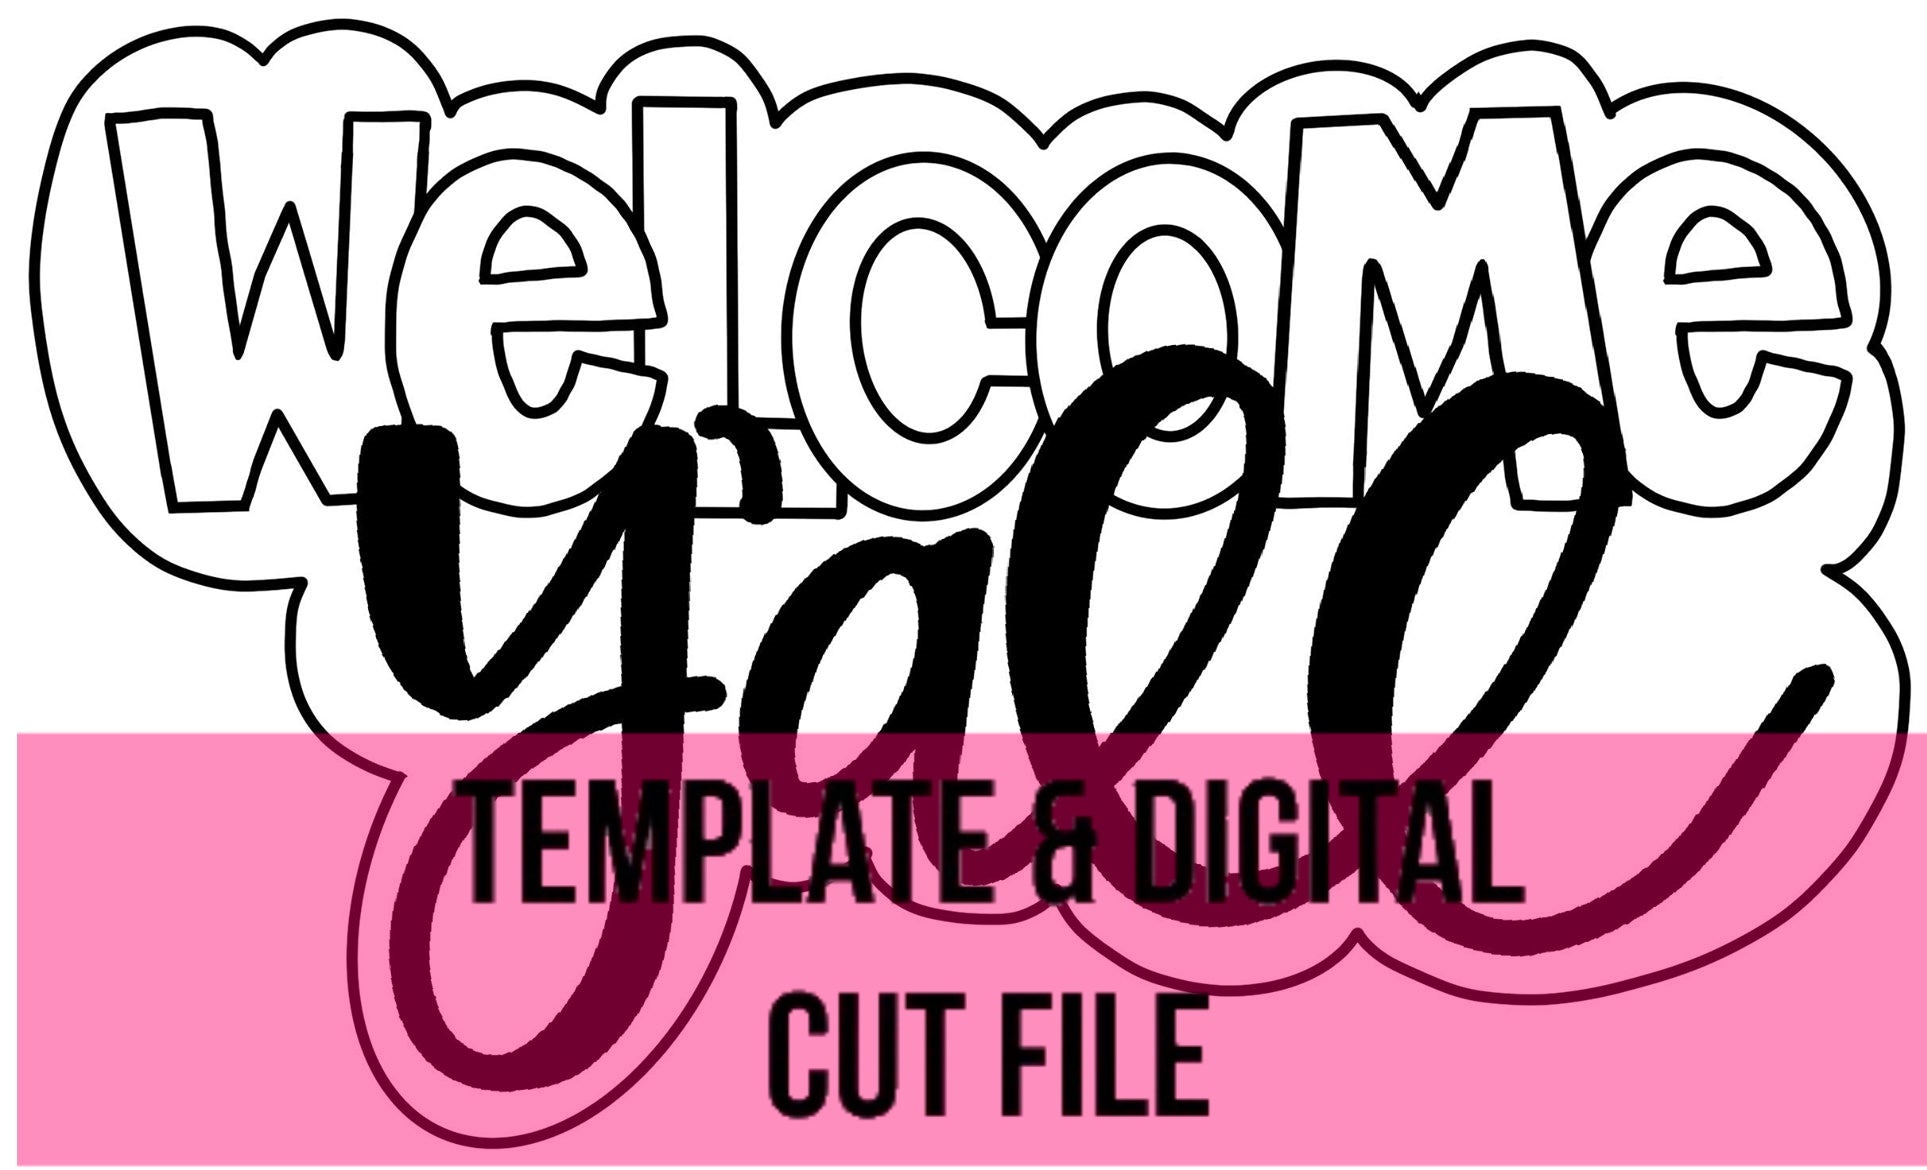 Welcome Y'all Bubble Template & Digital Cut File